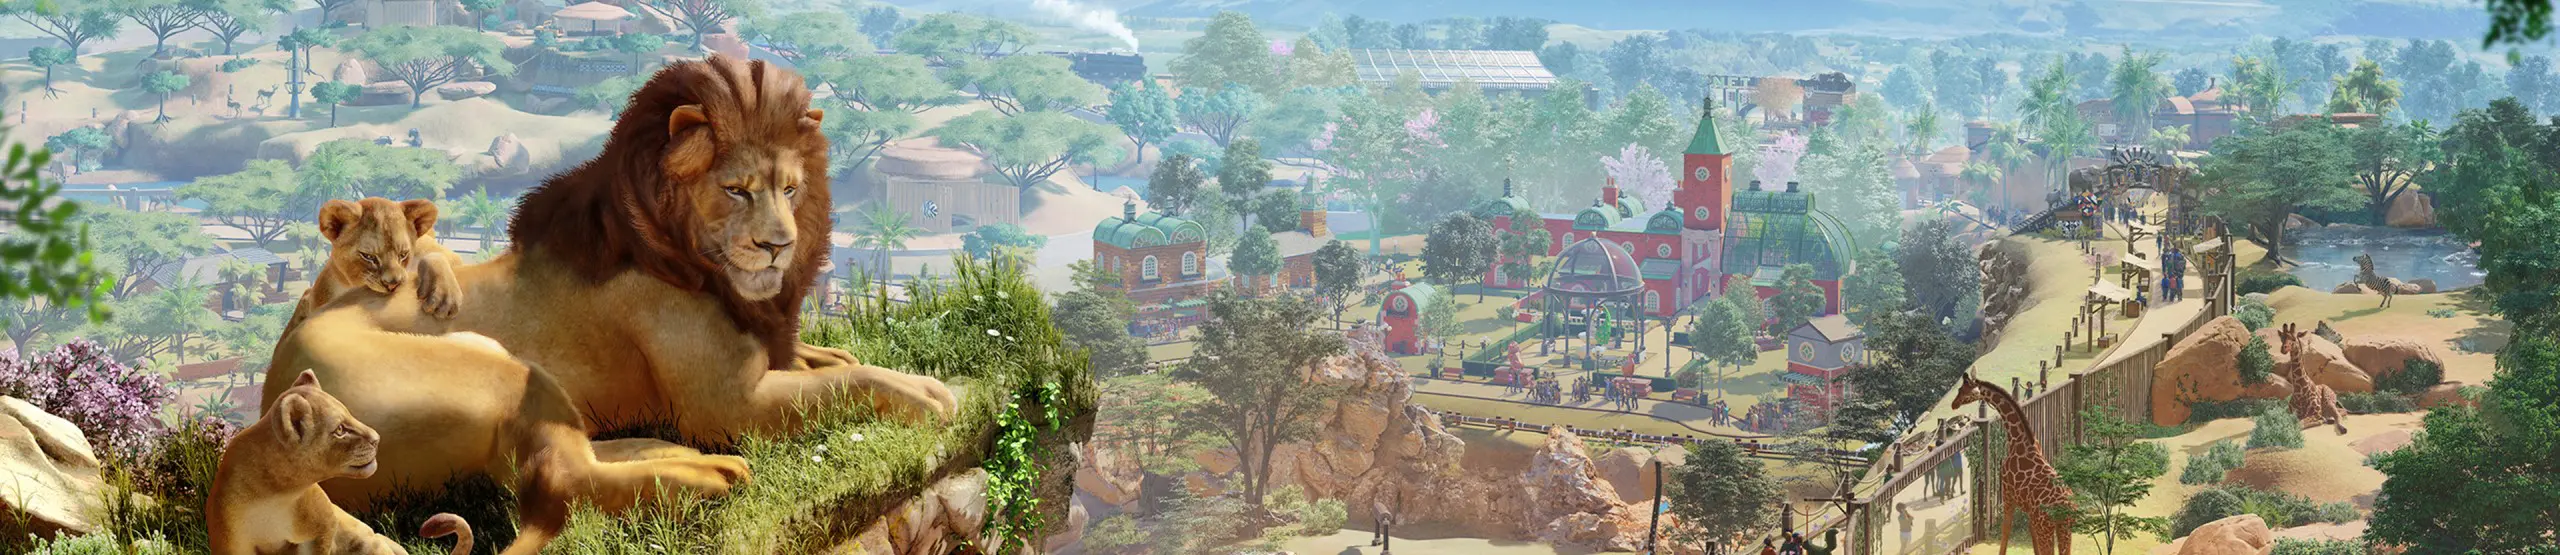 VIRTUOS ART PARTICIPATED IN BUILDING A FANTASTIC WORLD OF WILDLIFE FOR PLANET ZOO